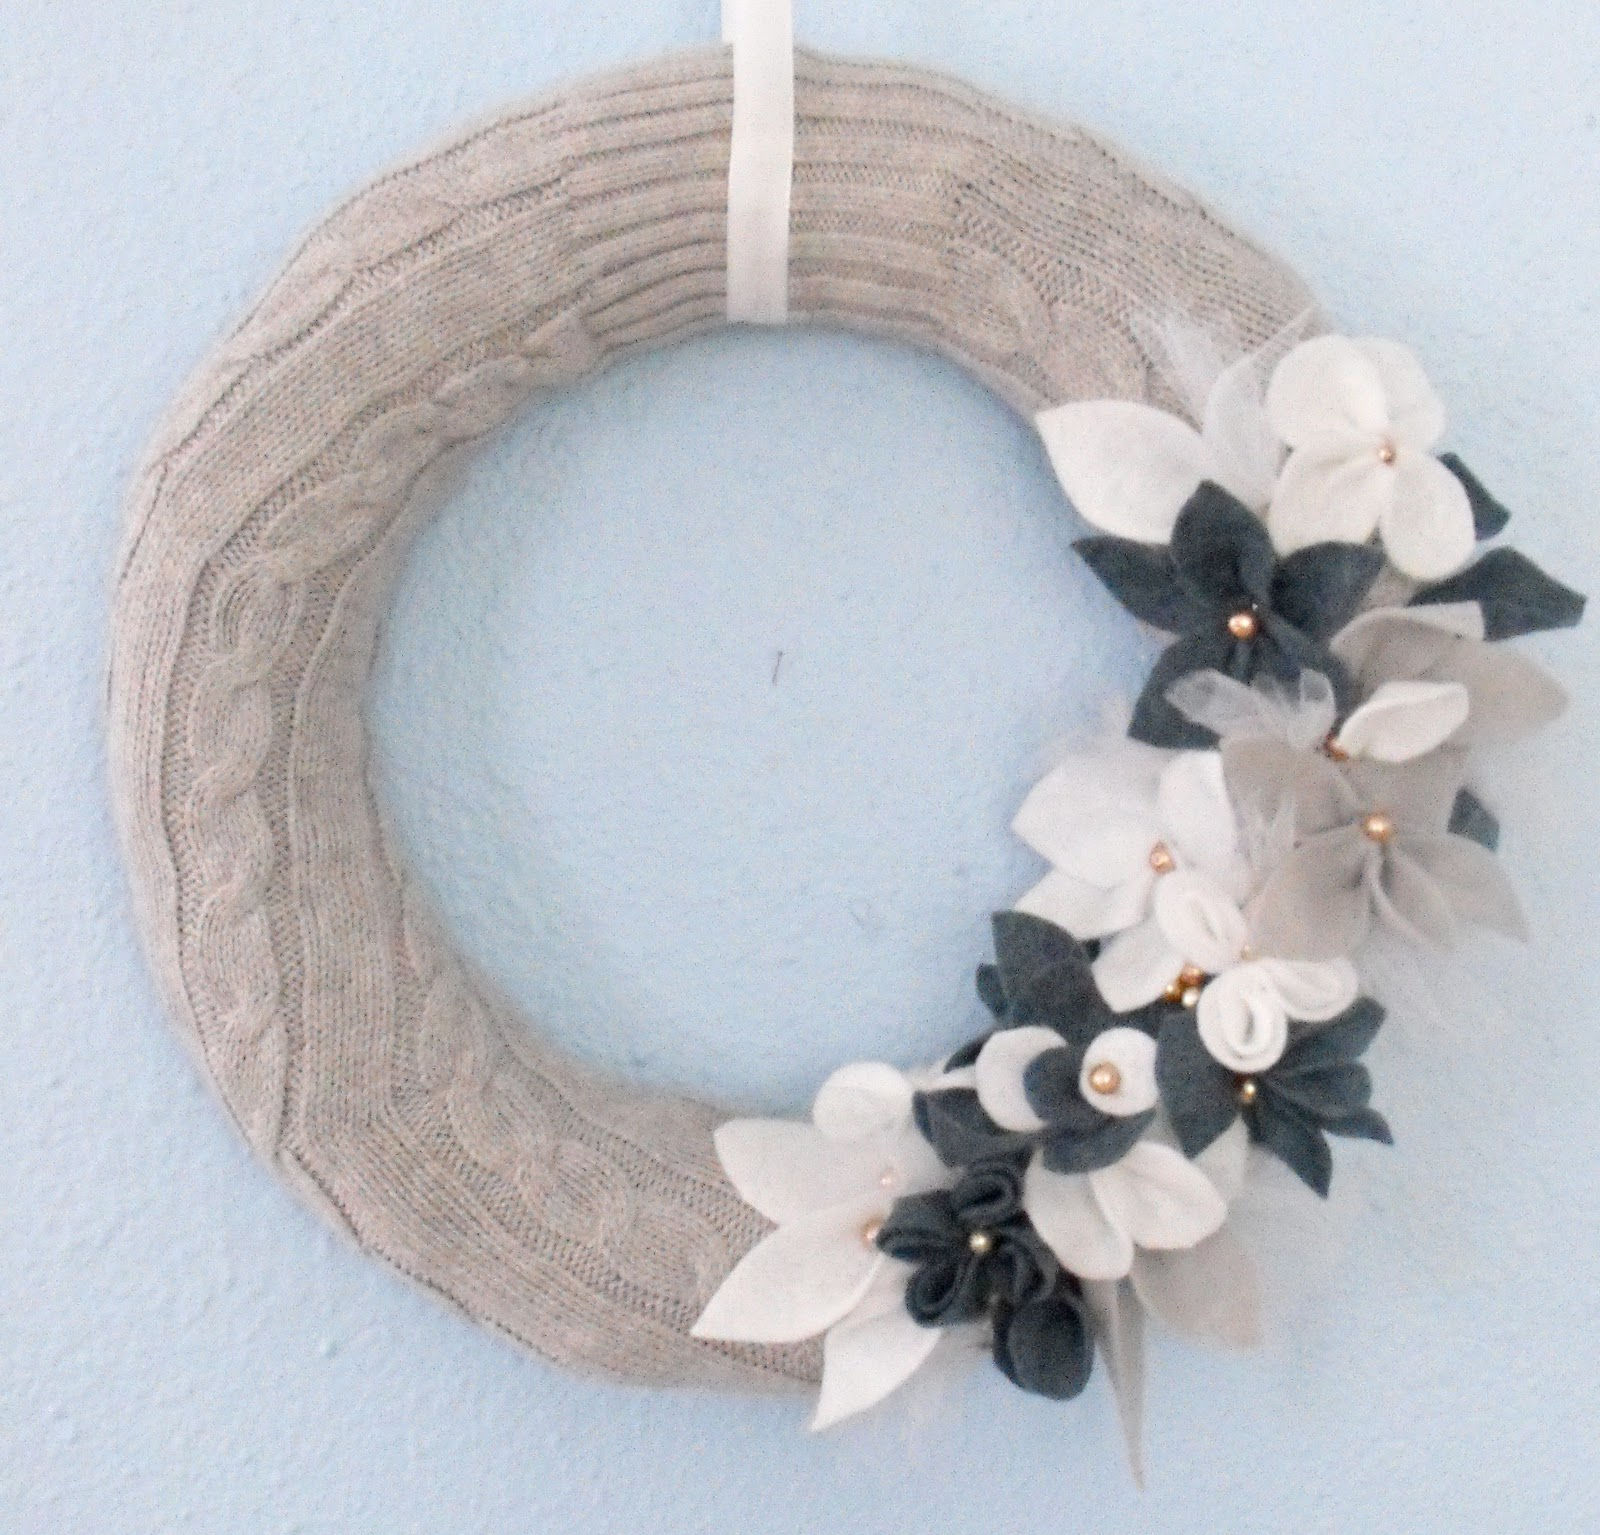 Upcycled Sweater Wreath